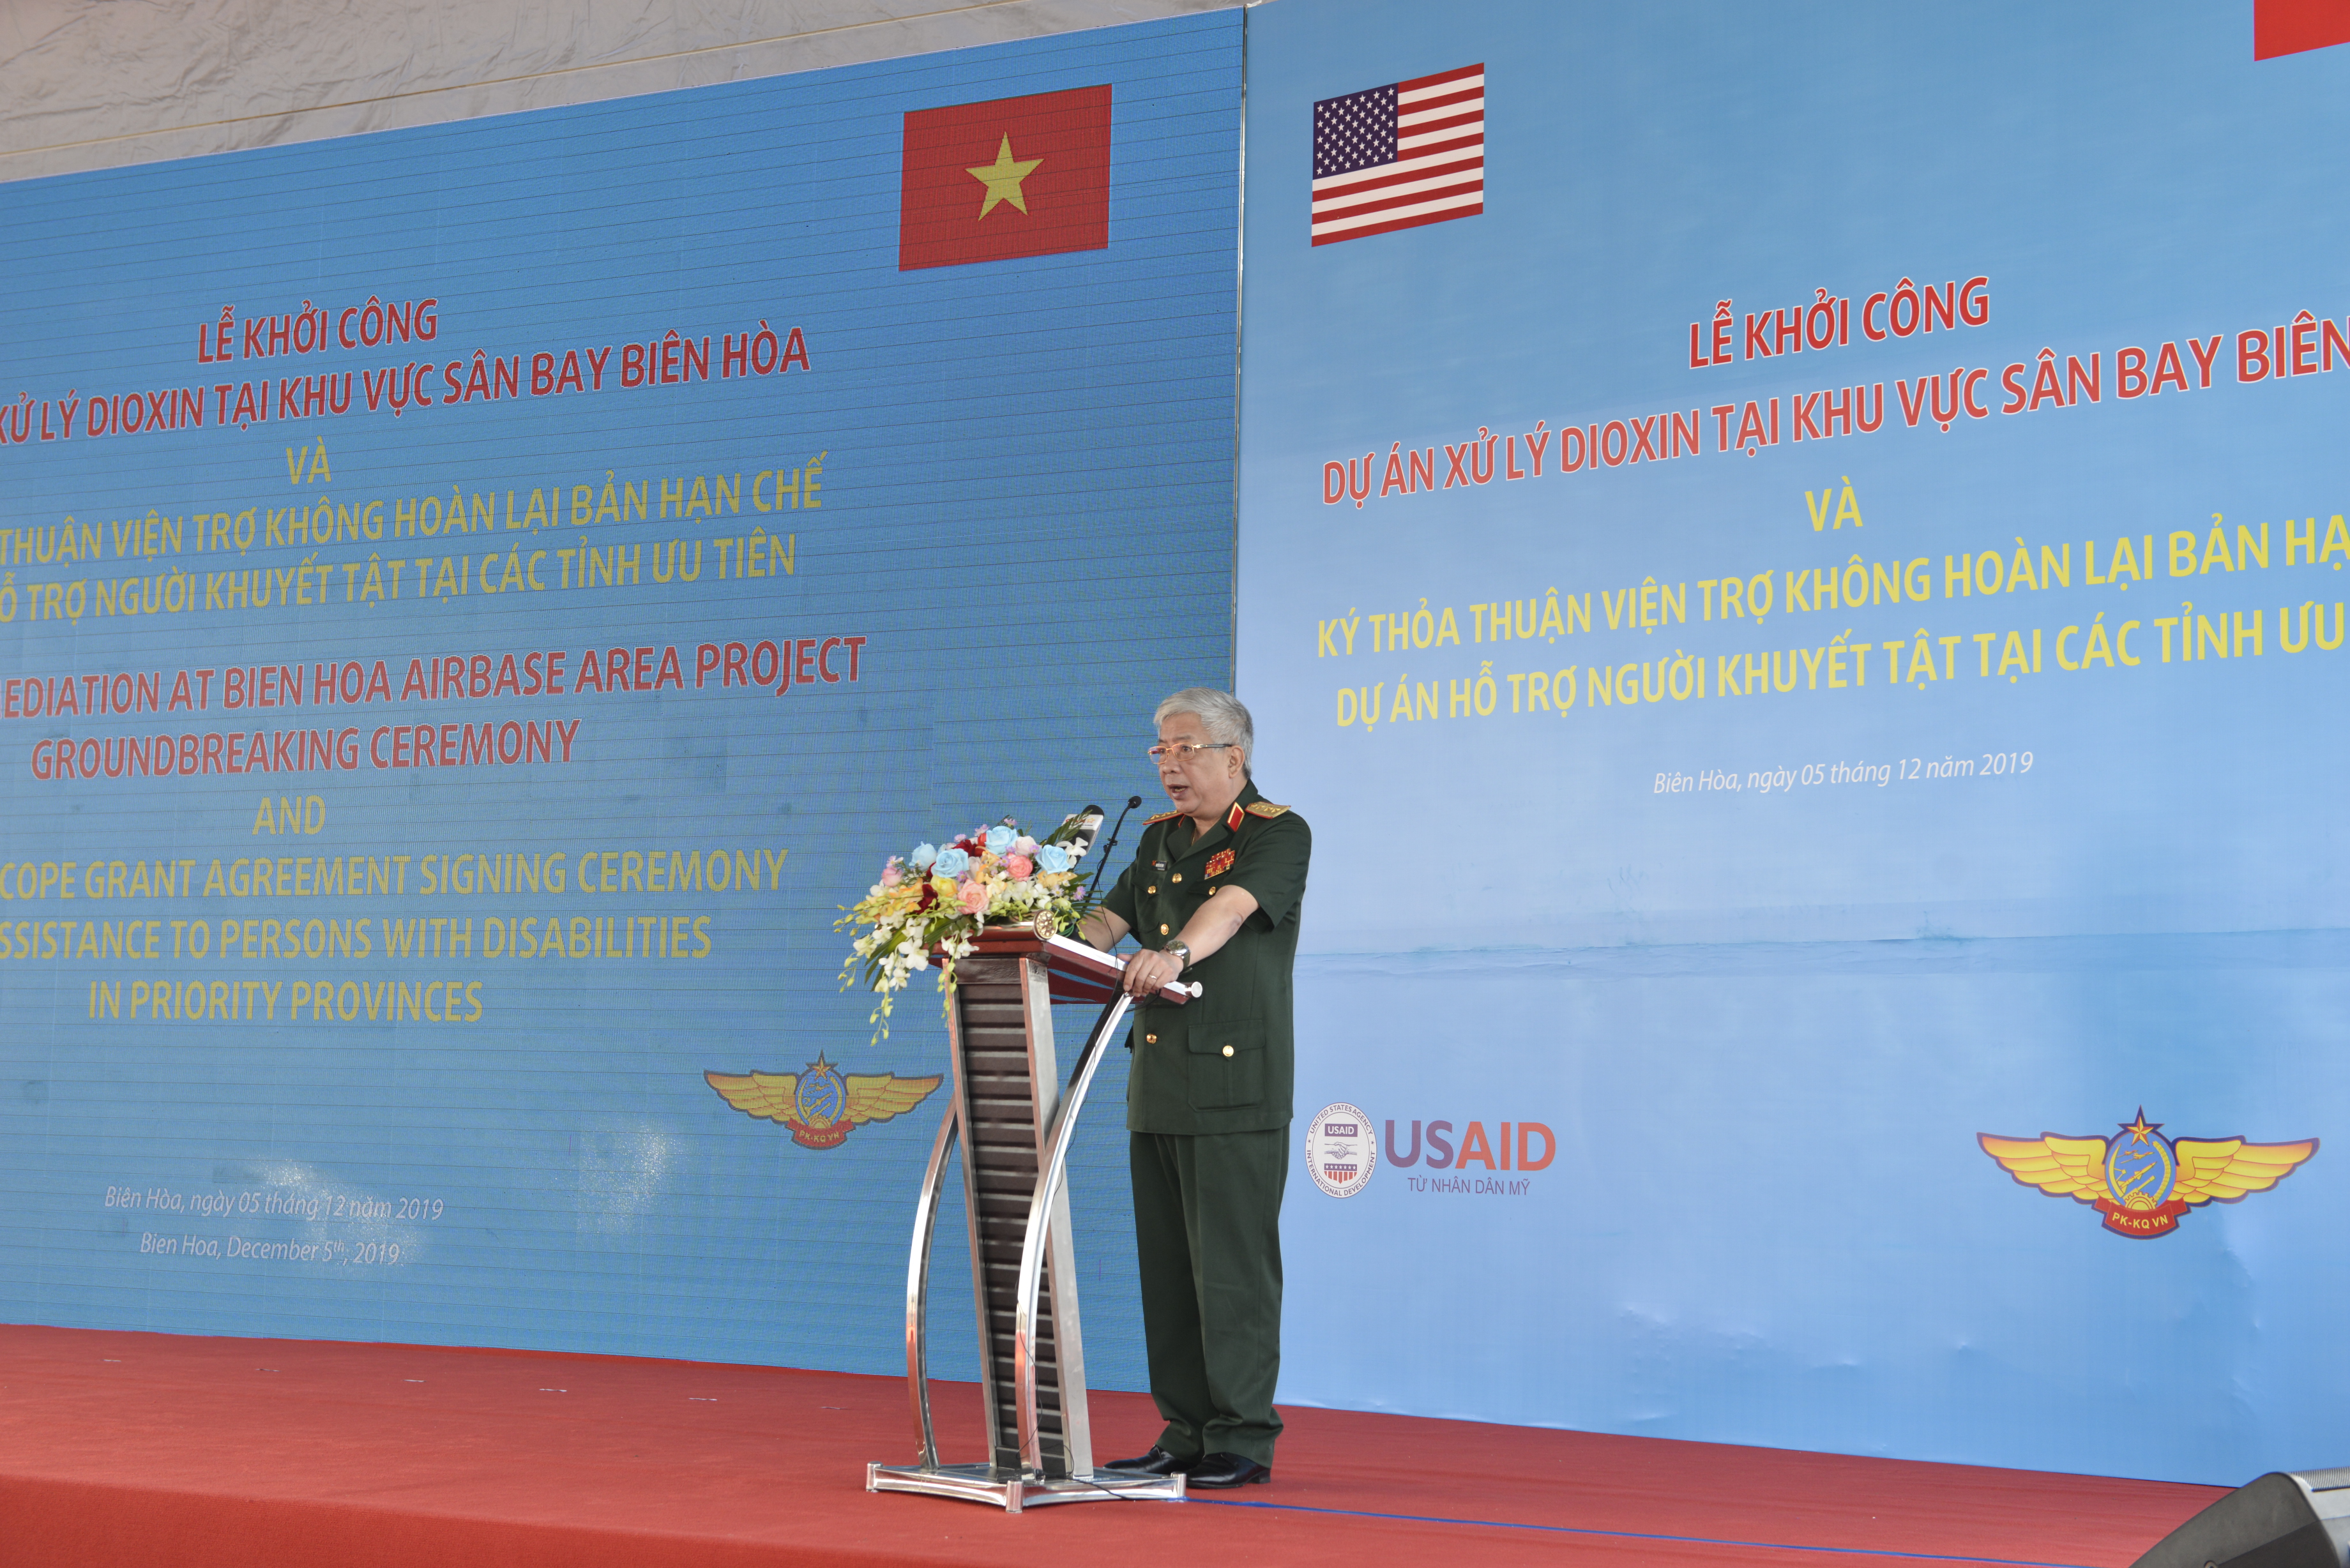 Vietnamese Minister of National Defense Nguyen Chi Vinh speaks at the launch of dioxin remediation operations at Bien Hoa Airbase in Bien Hoa City, Dong Nai Province in southern Vietnam on December 5, 2019. Photo: USAID